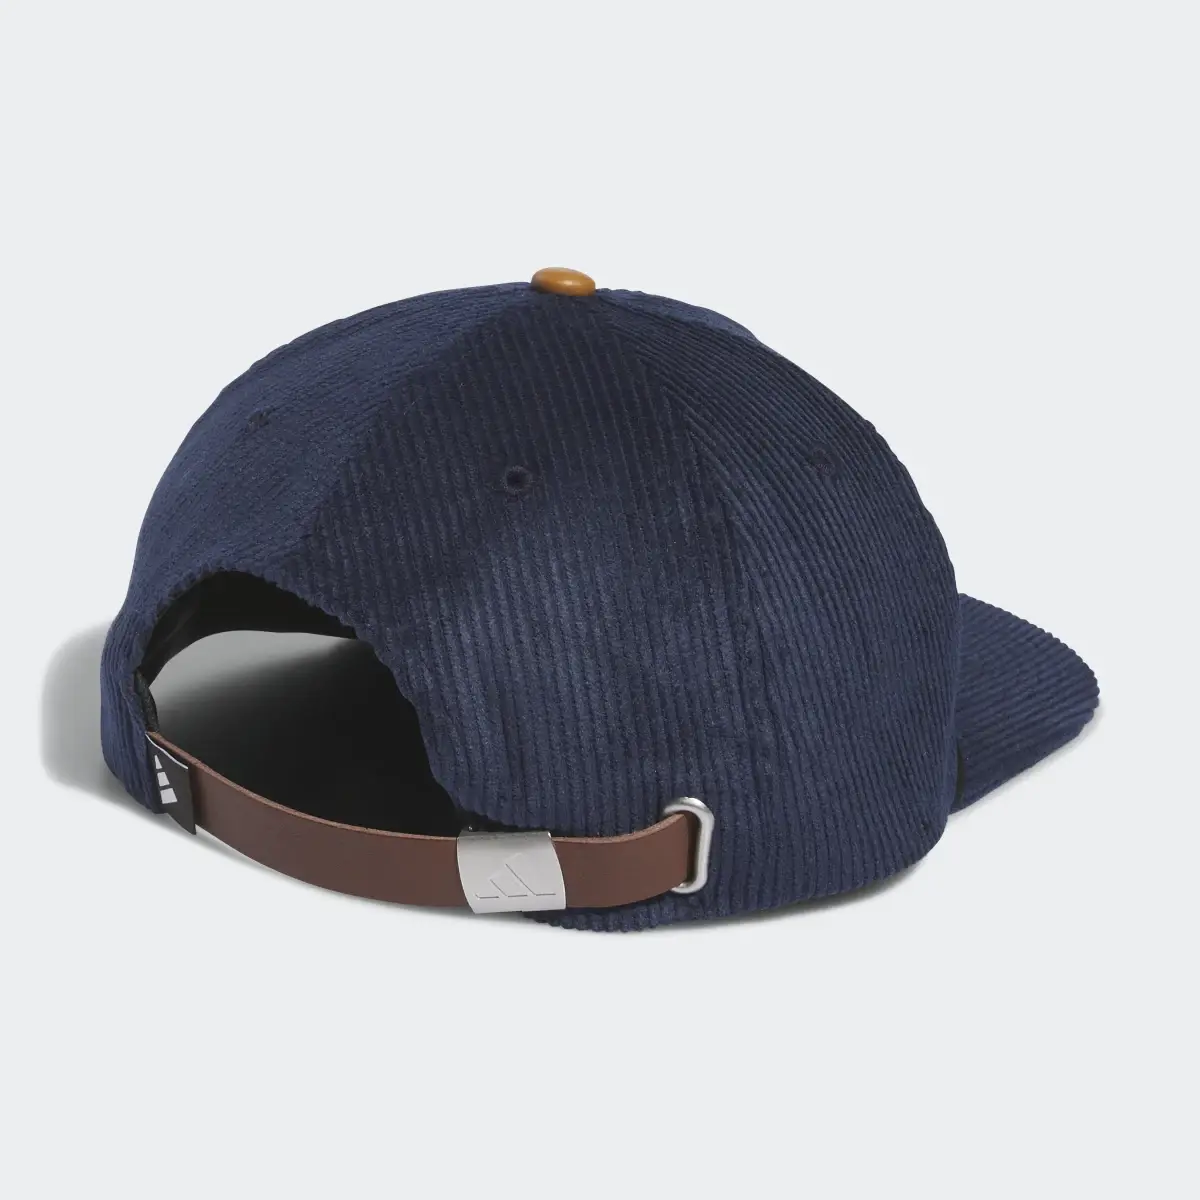 Adidas Corduroy Leather Five-Panel Rope Golf Hat. 3